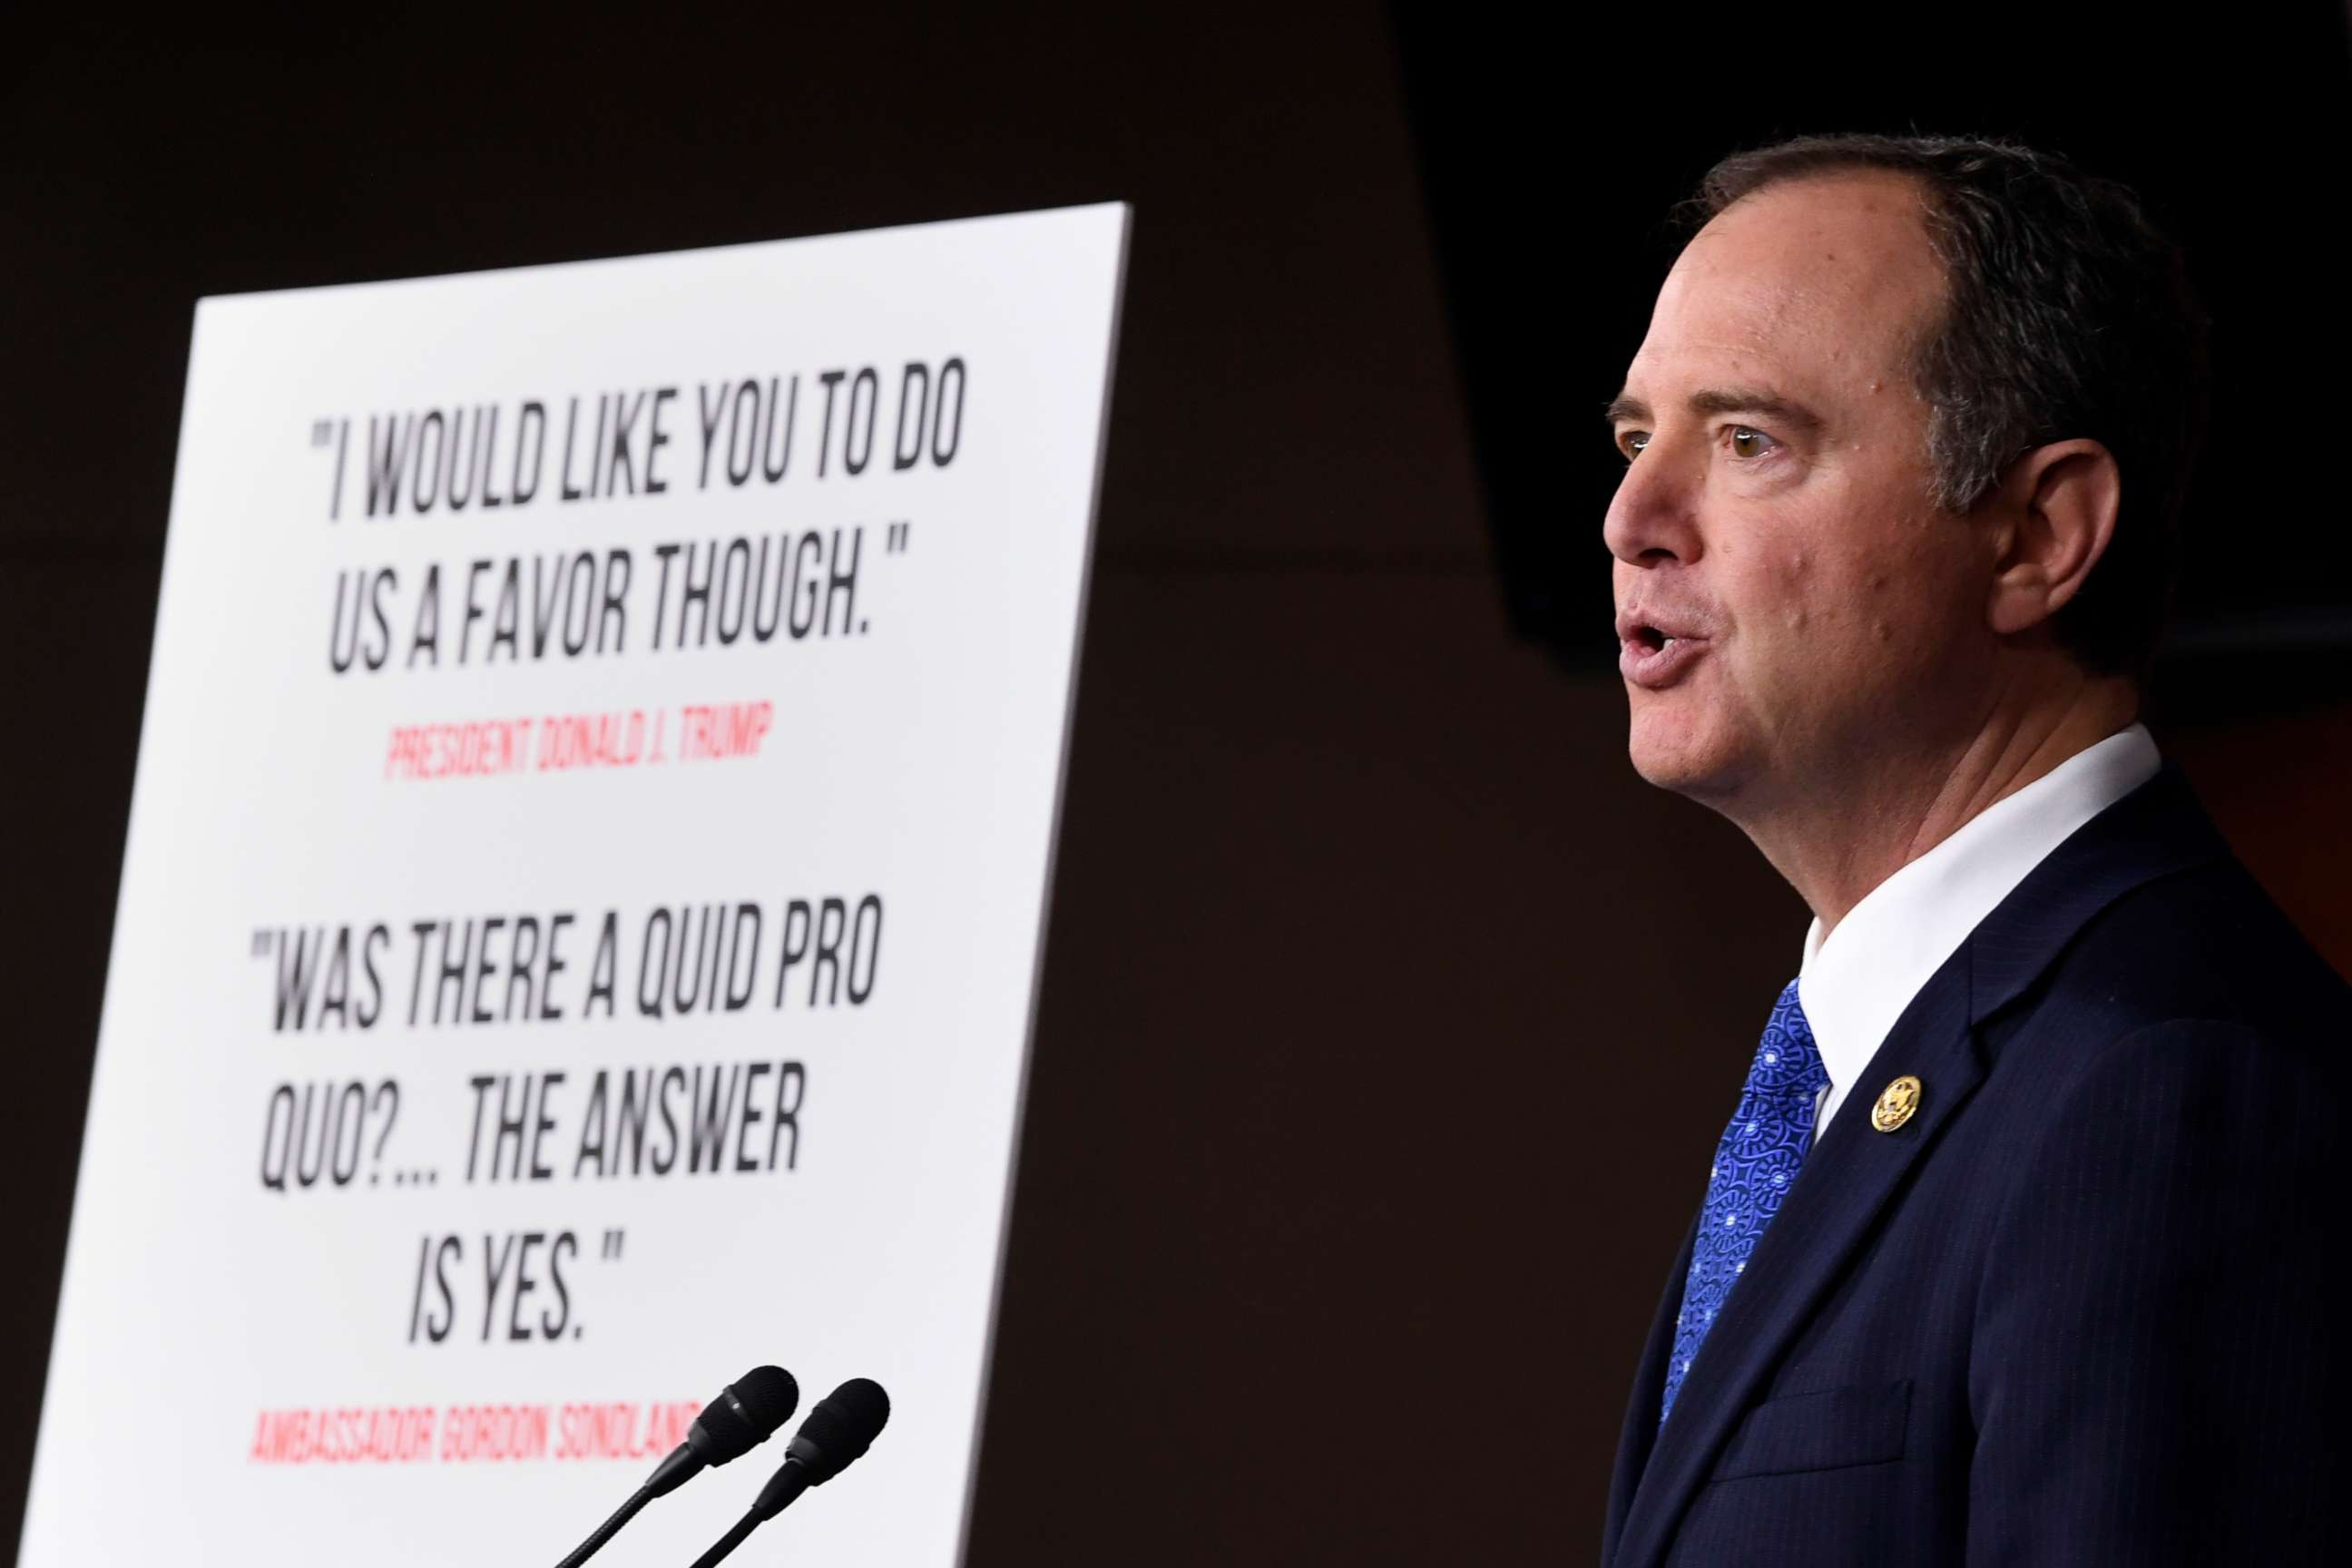 PHOTO: House Intelligence Committee Chairman Adam Schiff speaks during a news conference on Capitol Hill in Washington, Dec. 3, 2019.